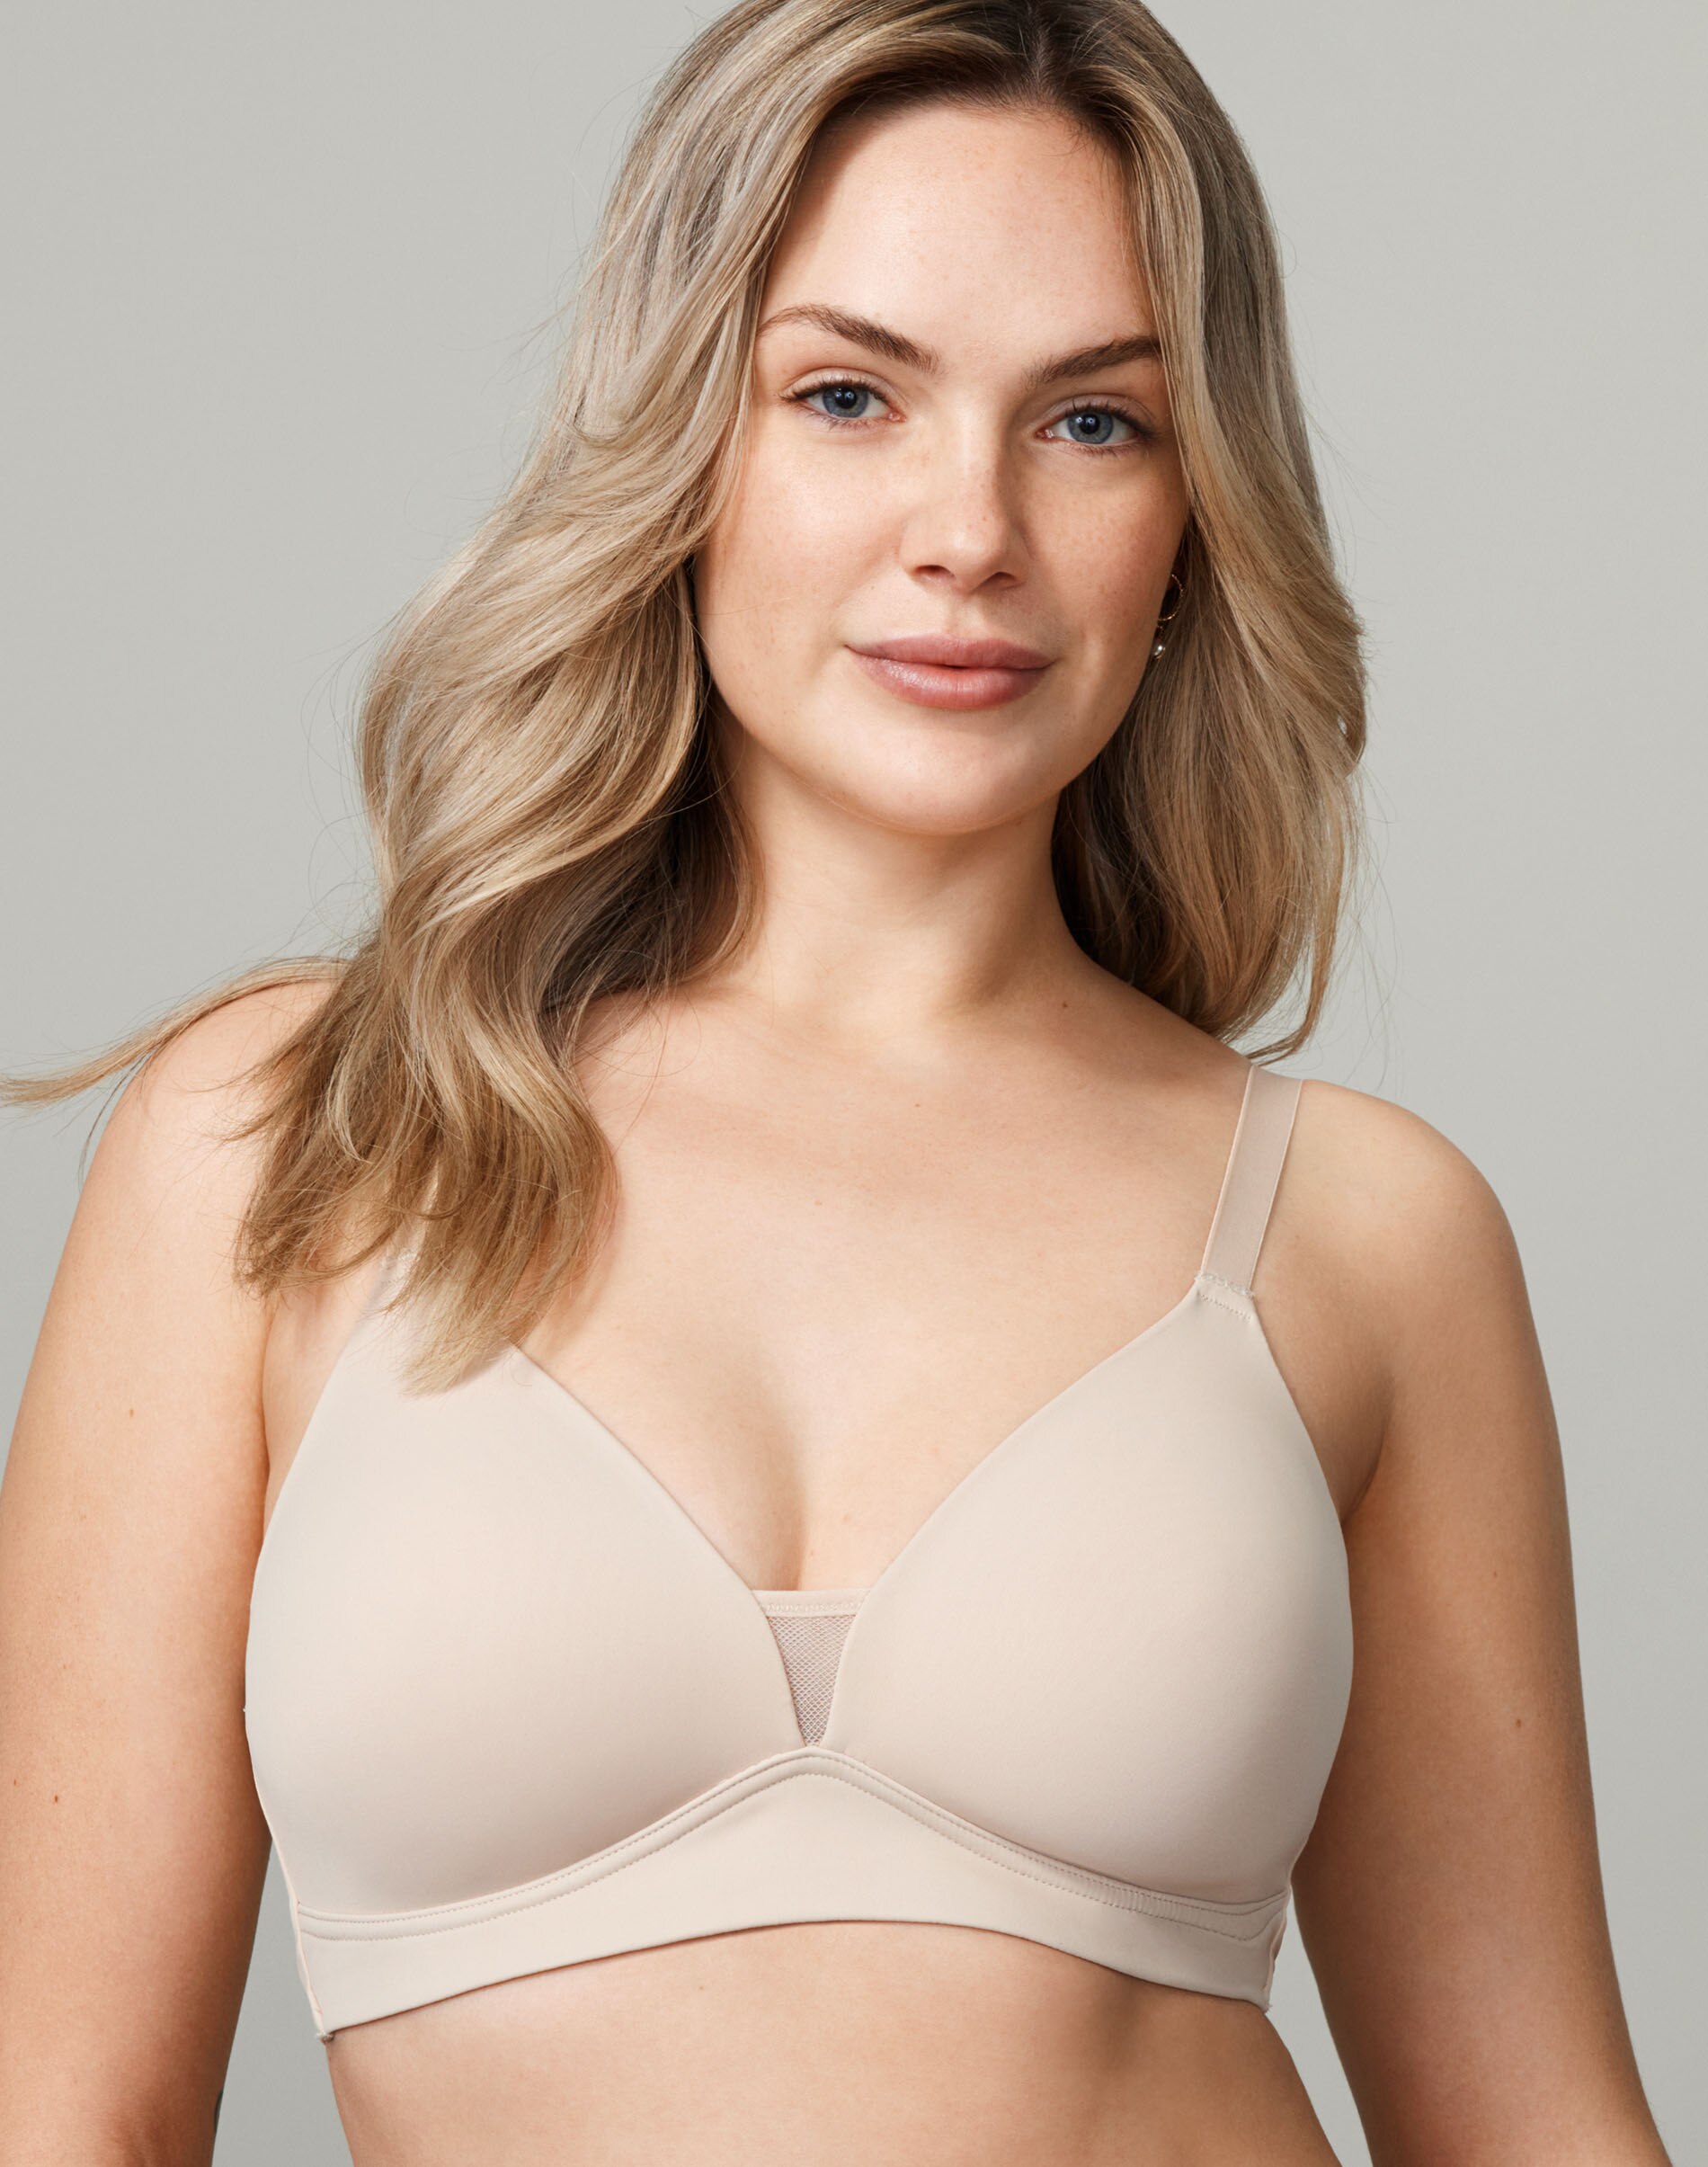 ZORQ Front Snaps Full Coverage Bras for Women, Convenient Front